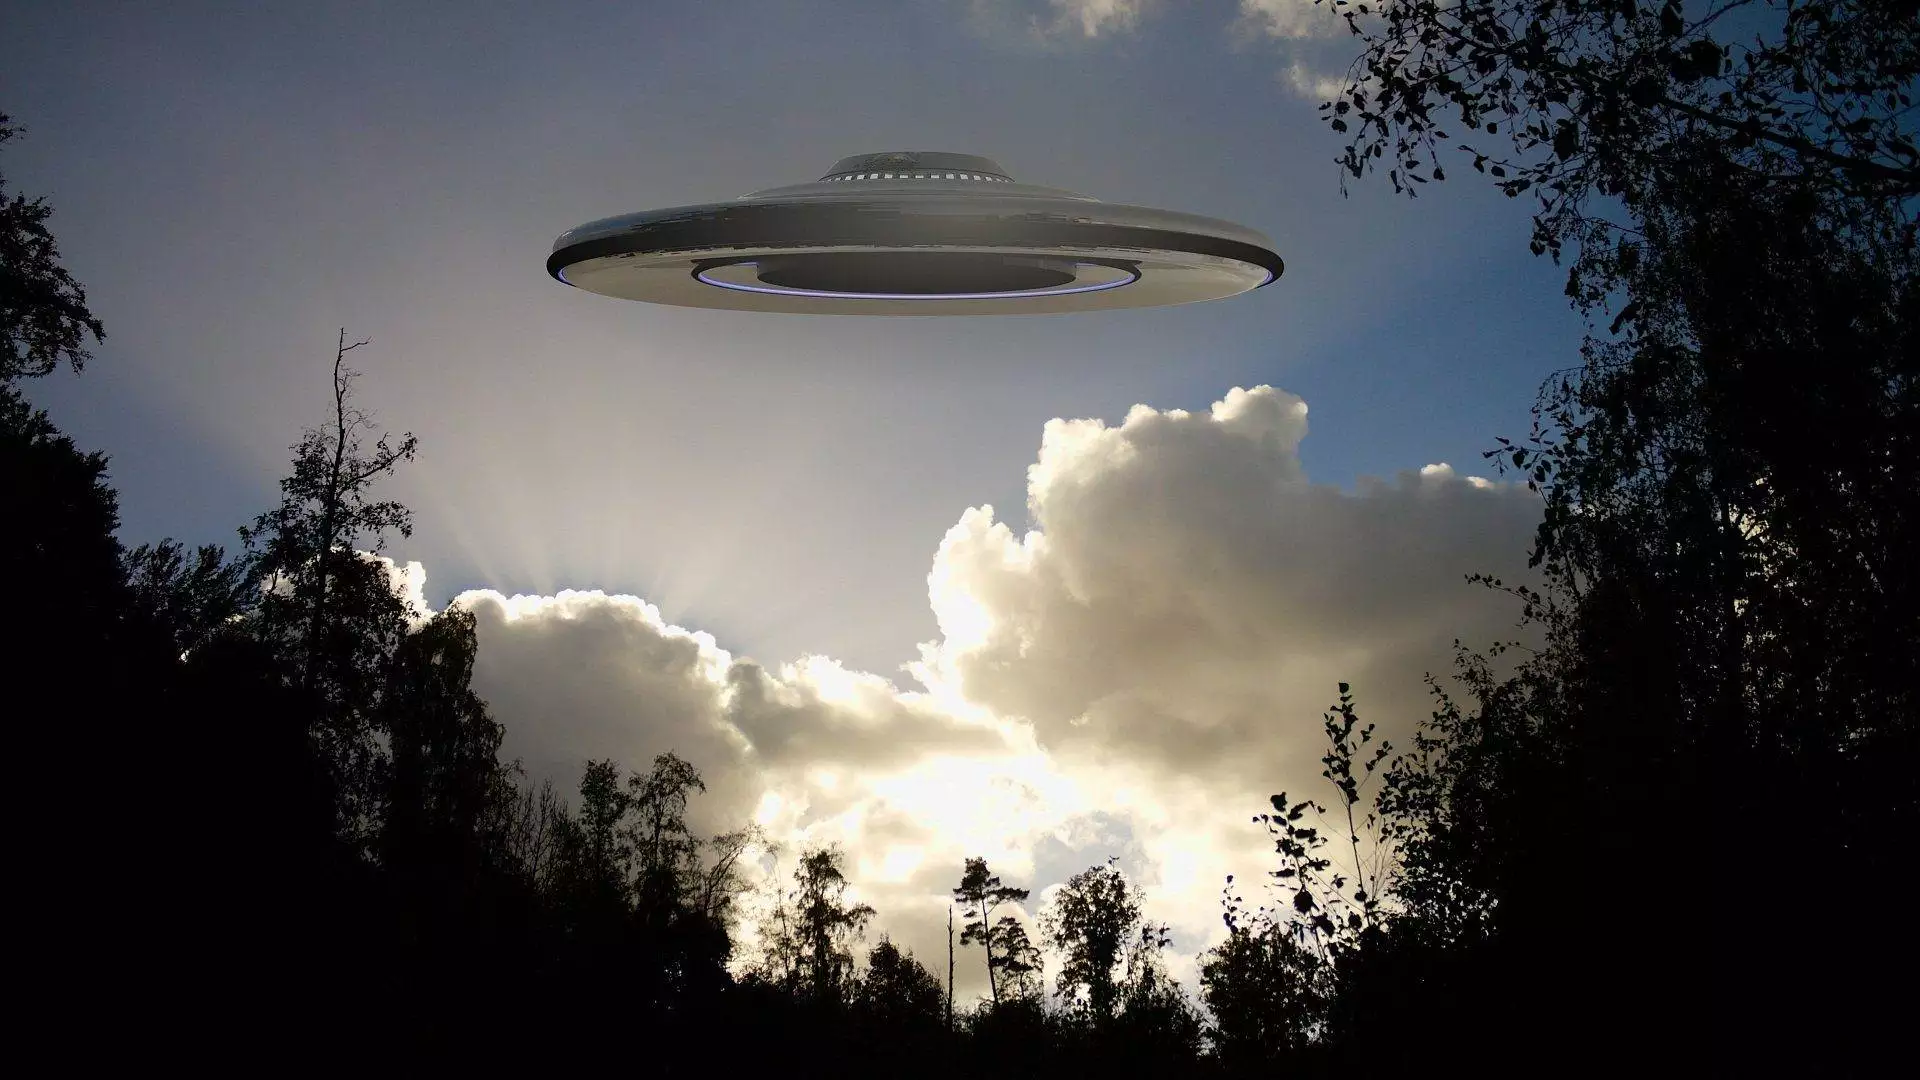 The Westall UFO Encounter of 1996: A Startling Account 3